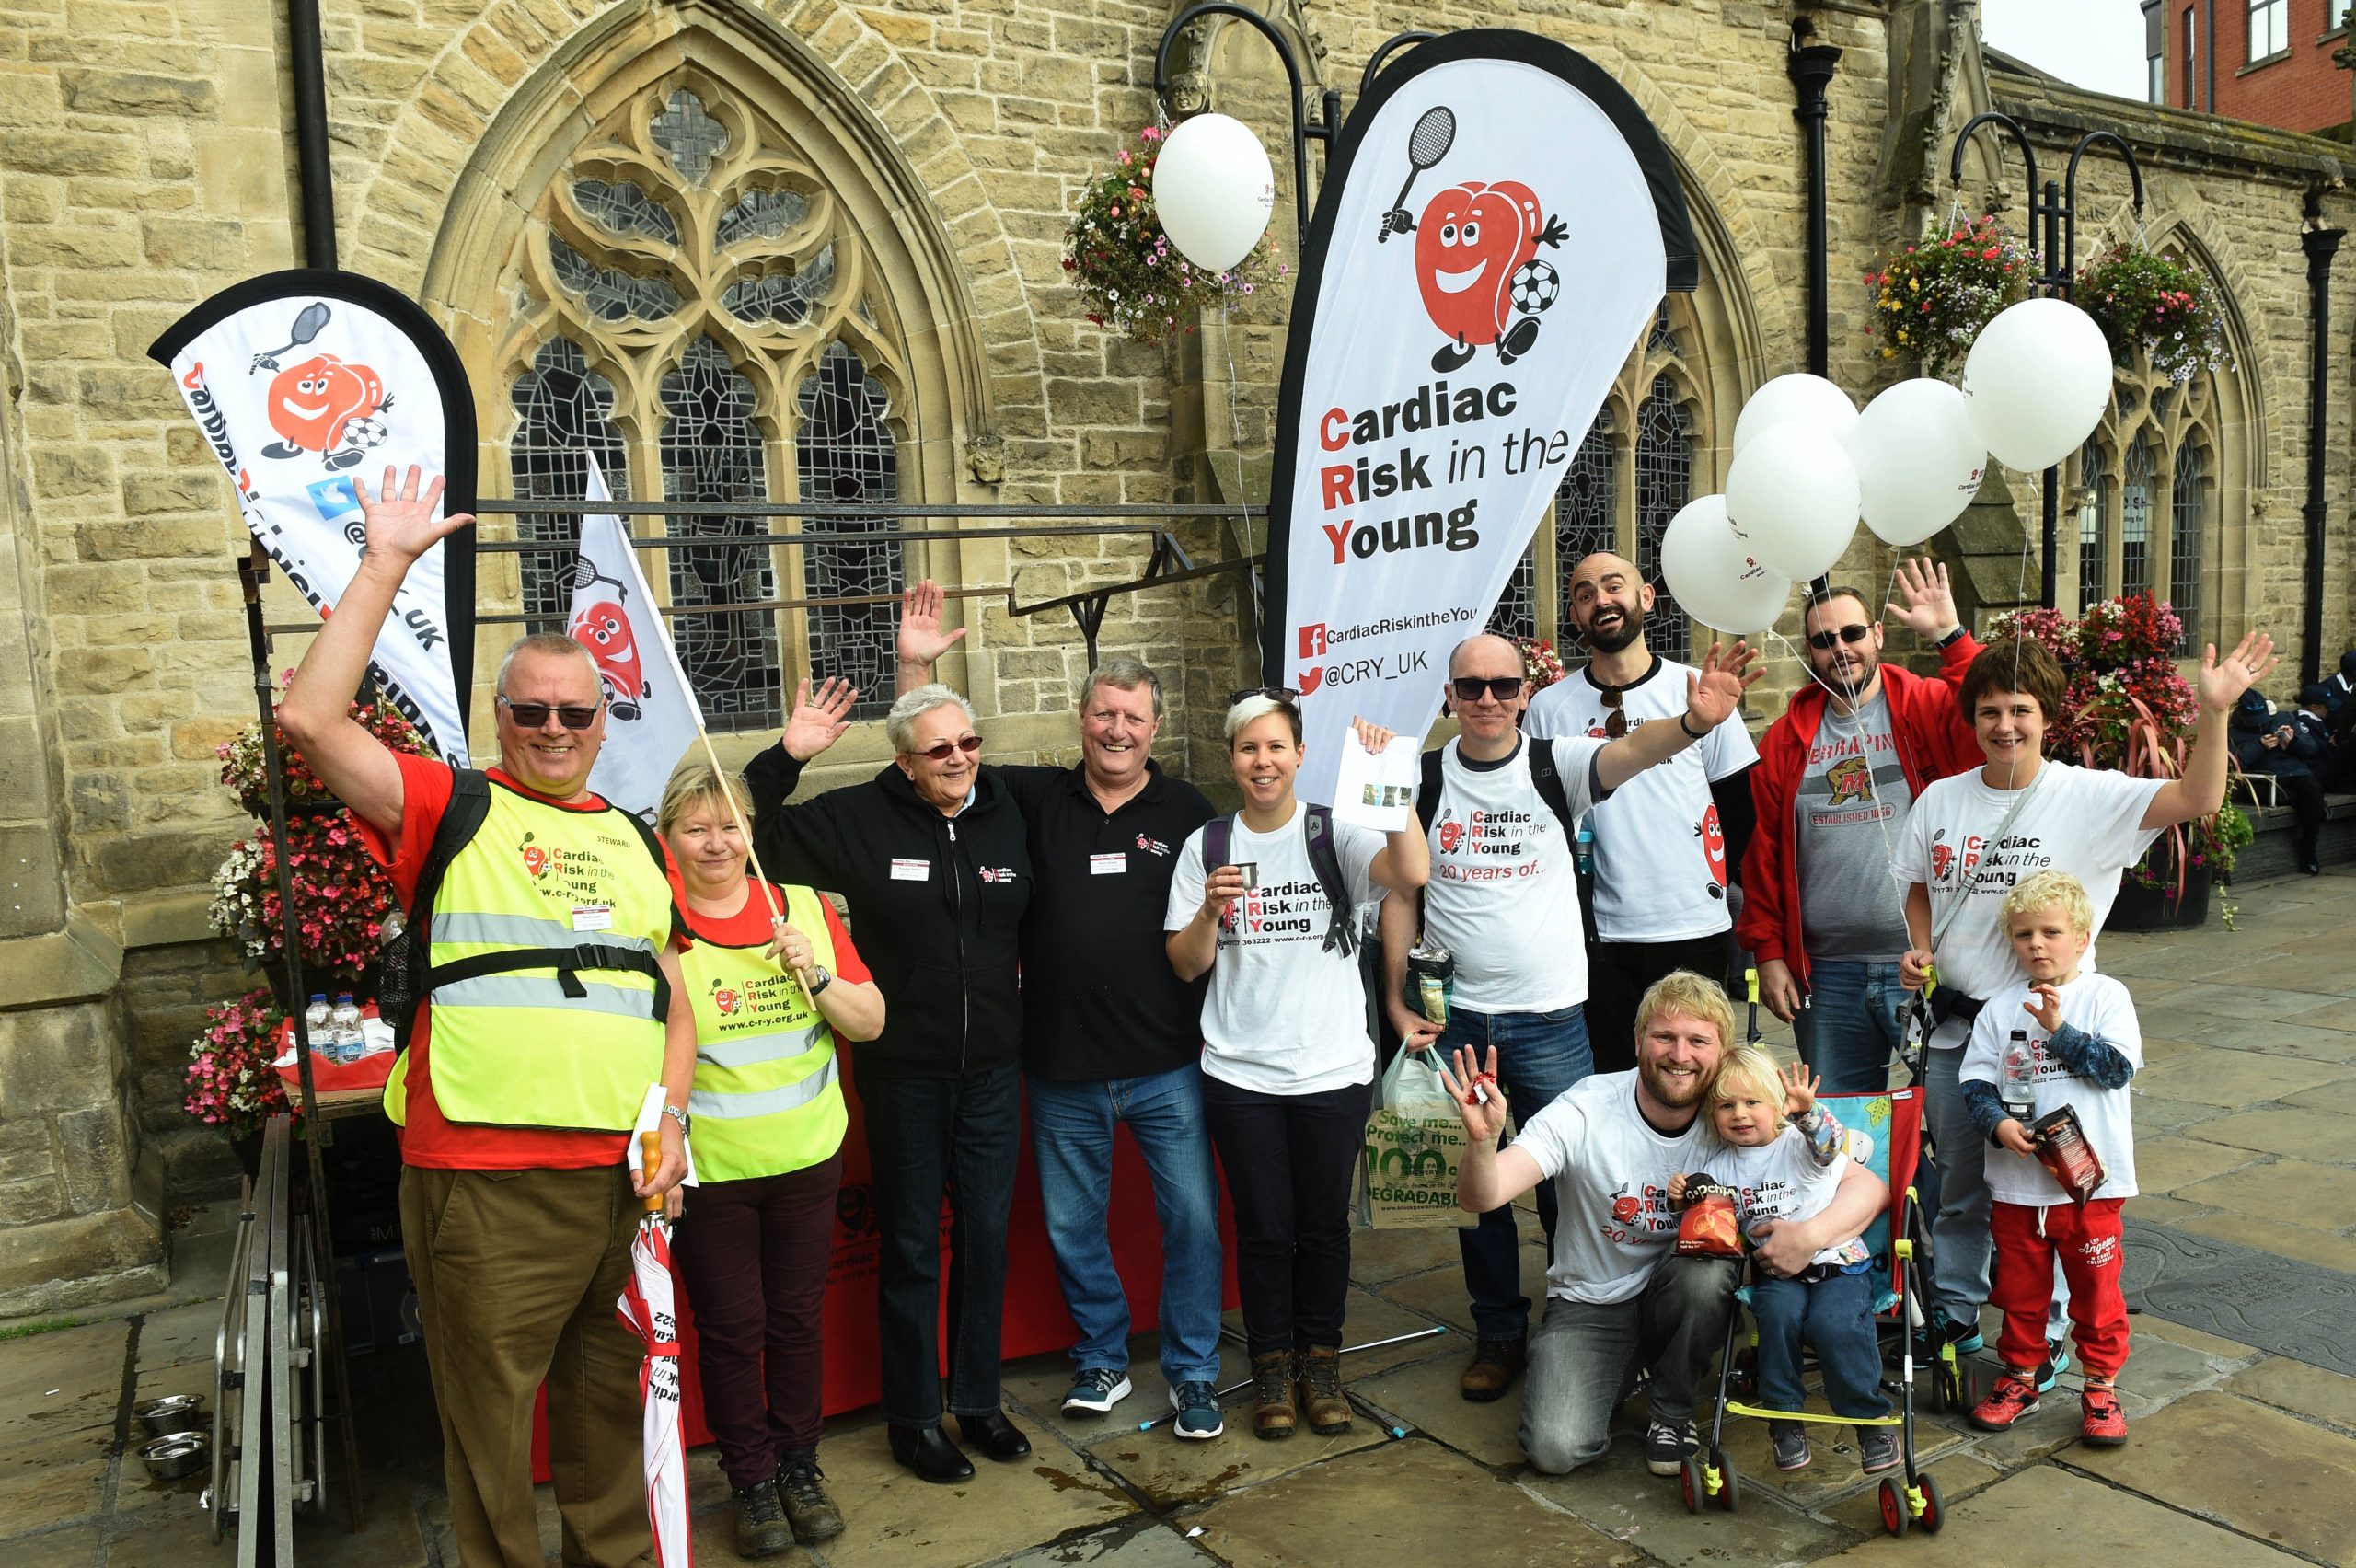 The Annual CRY (Cardiac Risk in the Young) charity walk took place on Saturday in Durham starting from the Rowing Club and going on a new route through the City. 01/10/16 Pic Doug Moody Photography